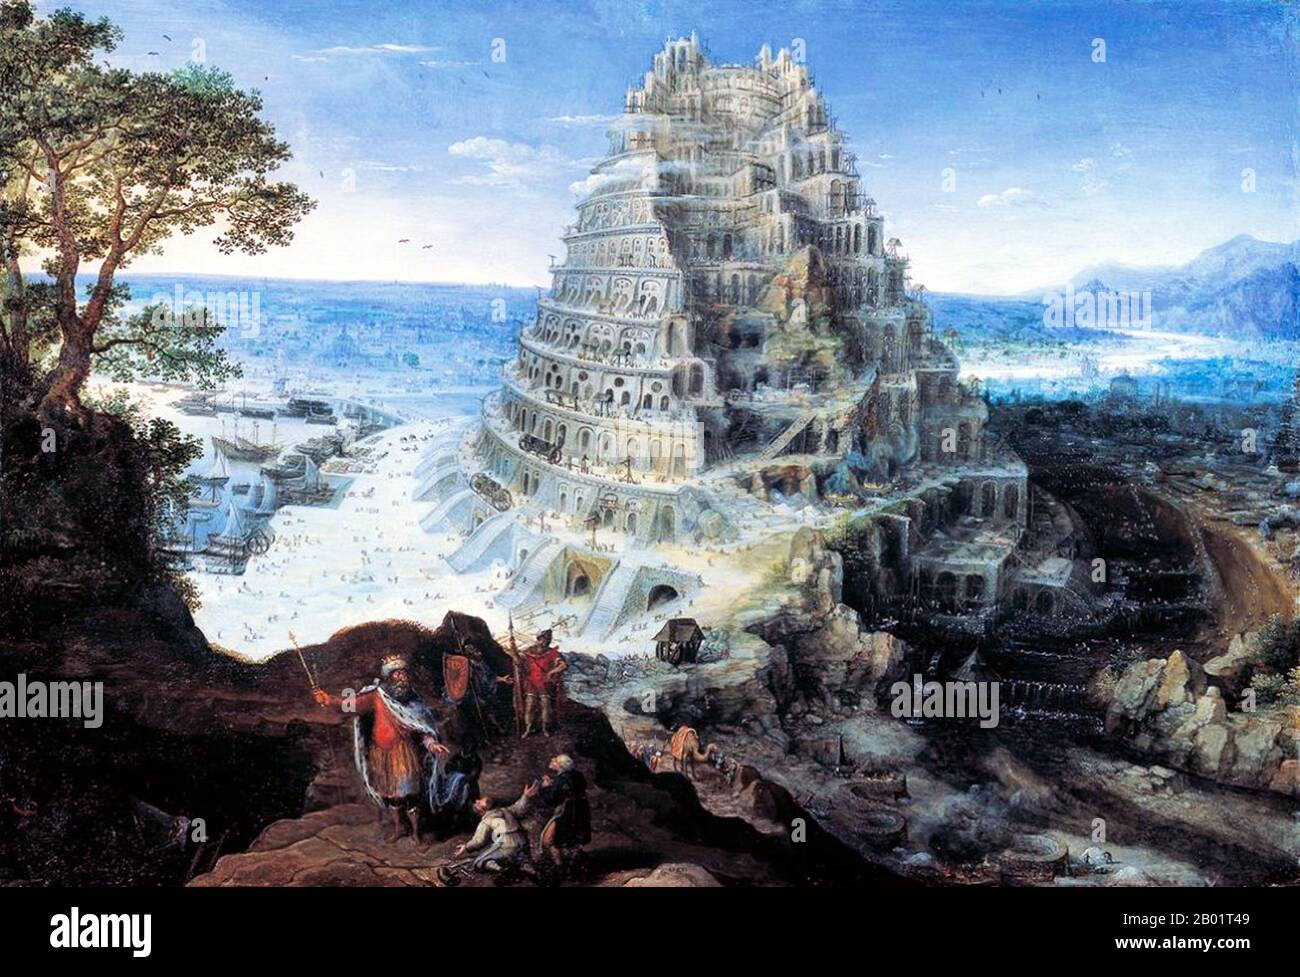 Belgium/Iraq/Mesopotamia: 'The Tower of Babel'. Oil on oak wood painting by Lucas Van Valckenborch (1535 - 2 February 1597), 1595.  The Tower of Babel, according to the Book of Genesis, was an enormous tower built in the plain of Shinar.  According to the biblical account, a united humanity of the generations following the Great Flood, speaking a single language and migrating from the east, came to the land of Shinar, where they resolved to build a city with a tower 'with its top in the heavens...lest we be scattered abroad upon the face of the Earth'. Stock Photo